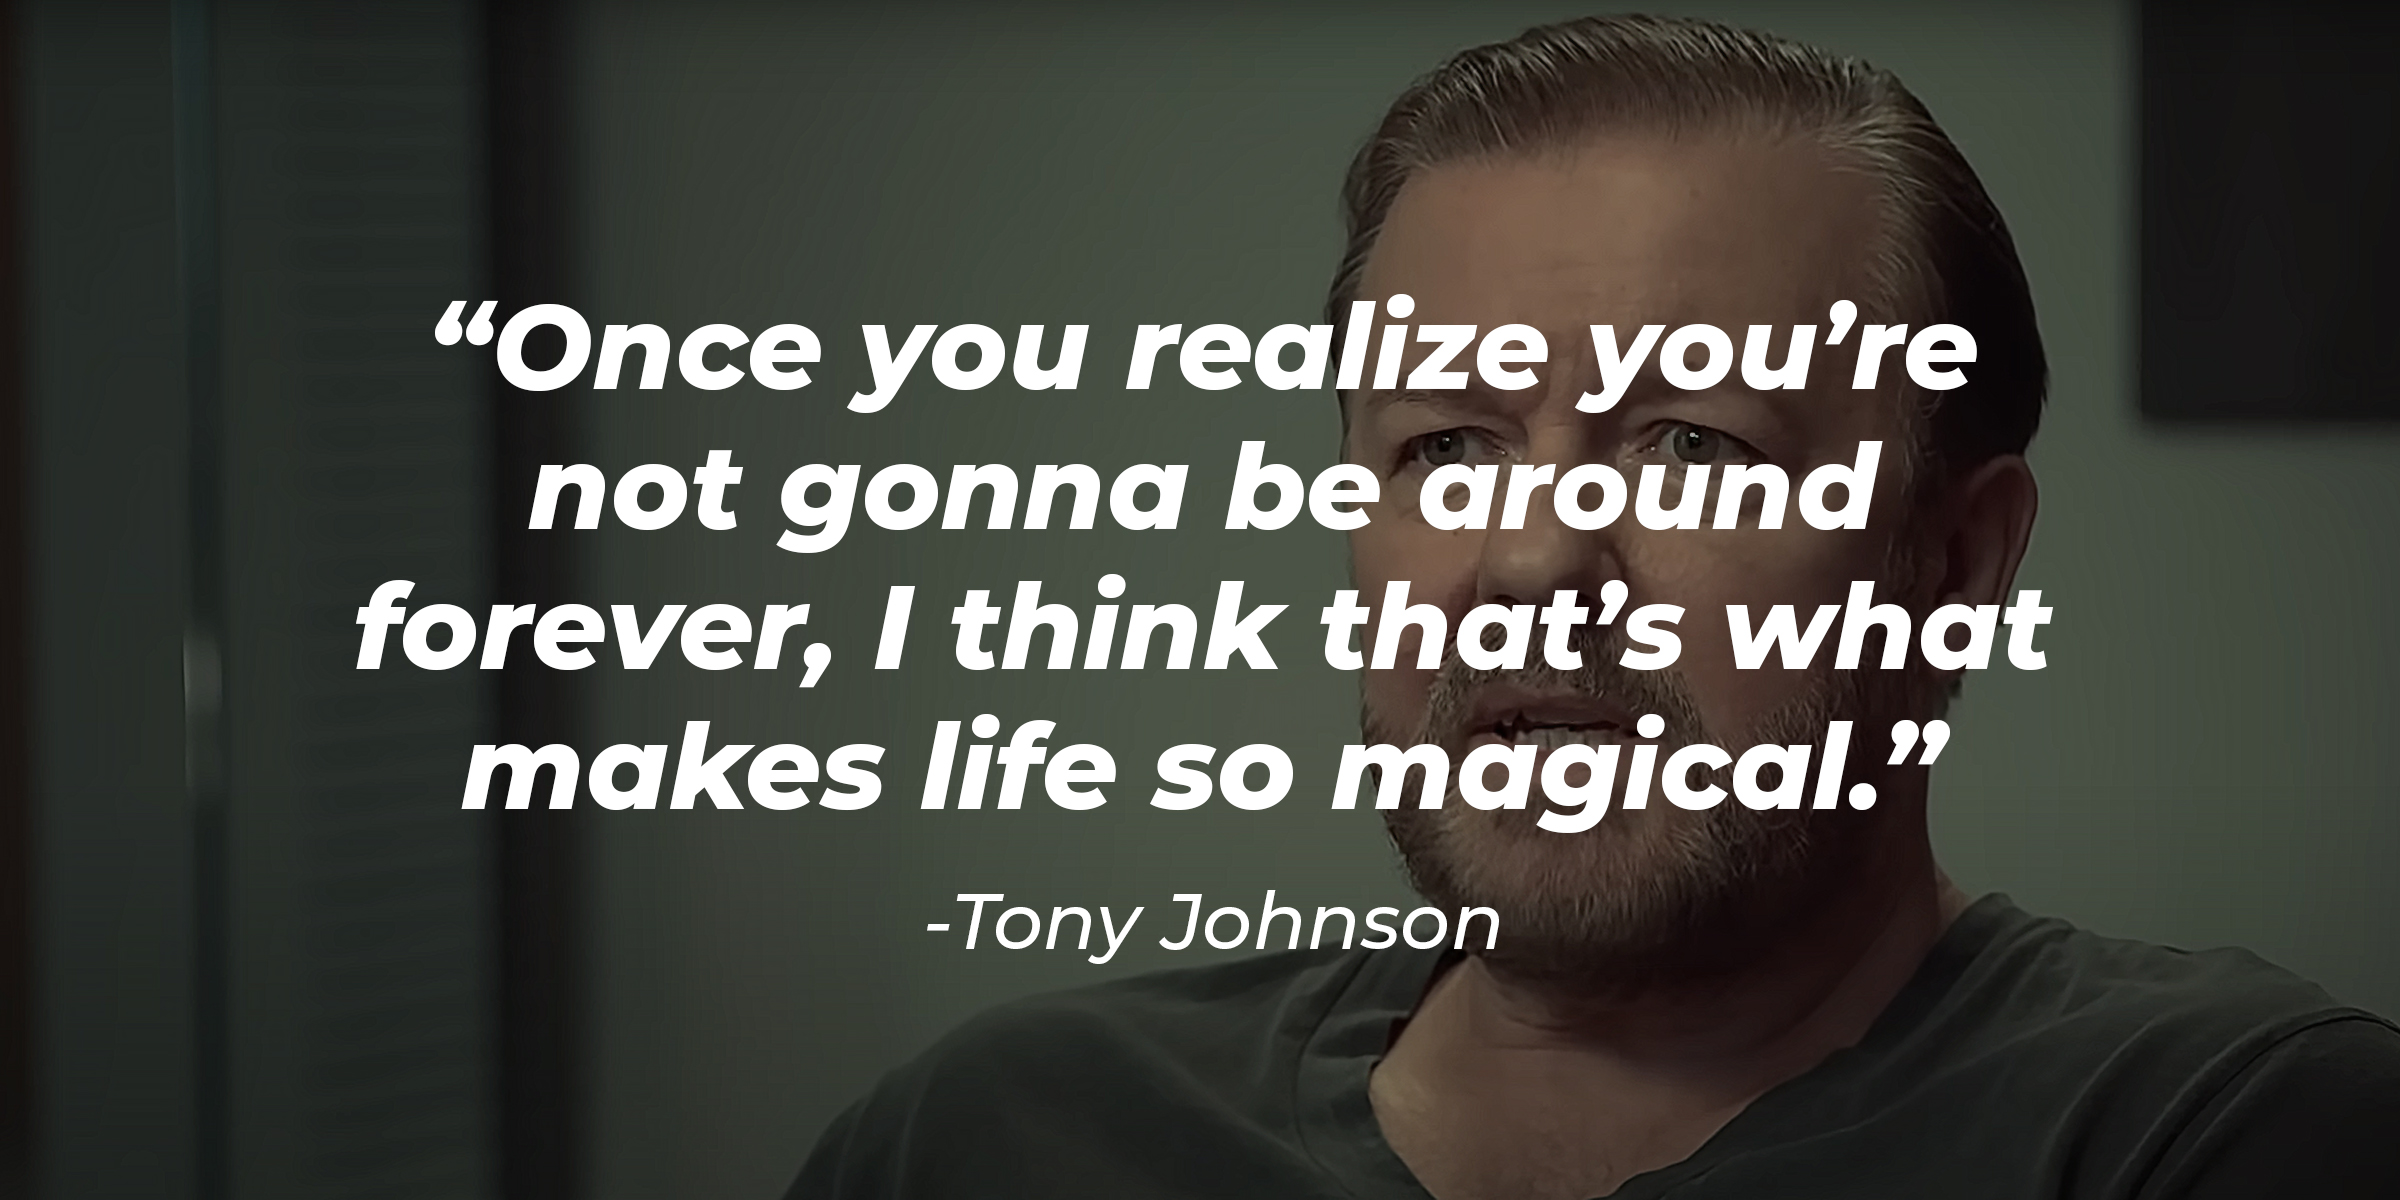 An image of Tony Johnson, with his quote: “Once you realize you’re not gonna be around forever, I think that’s what makes life so magical.” | Source: Youtube.com/Netflix